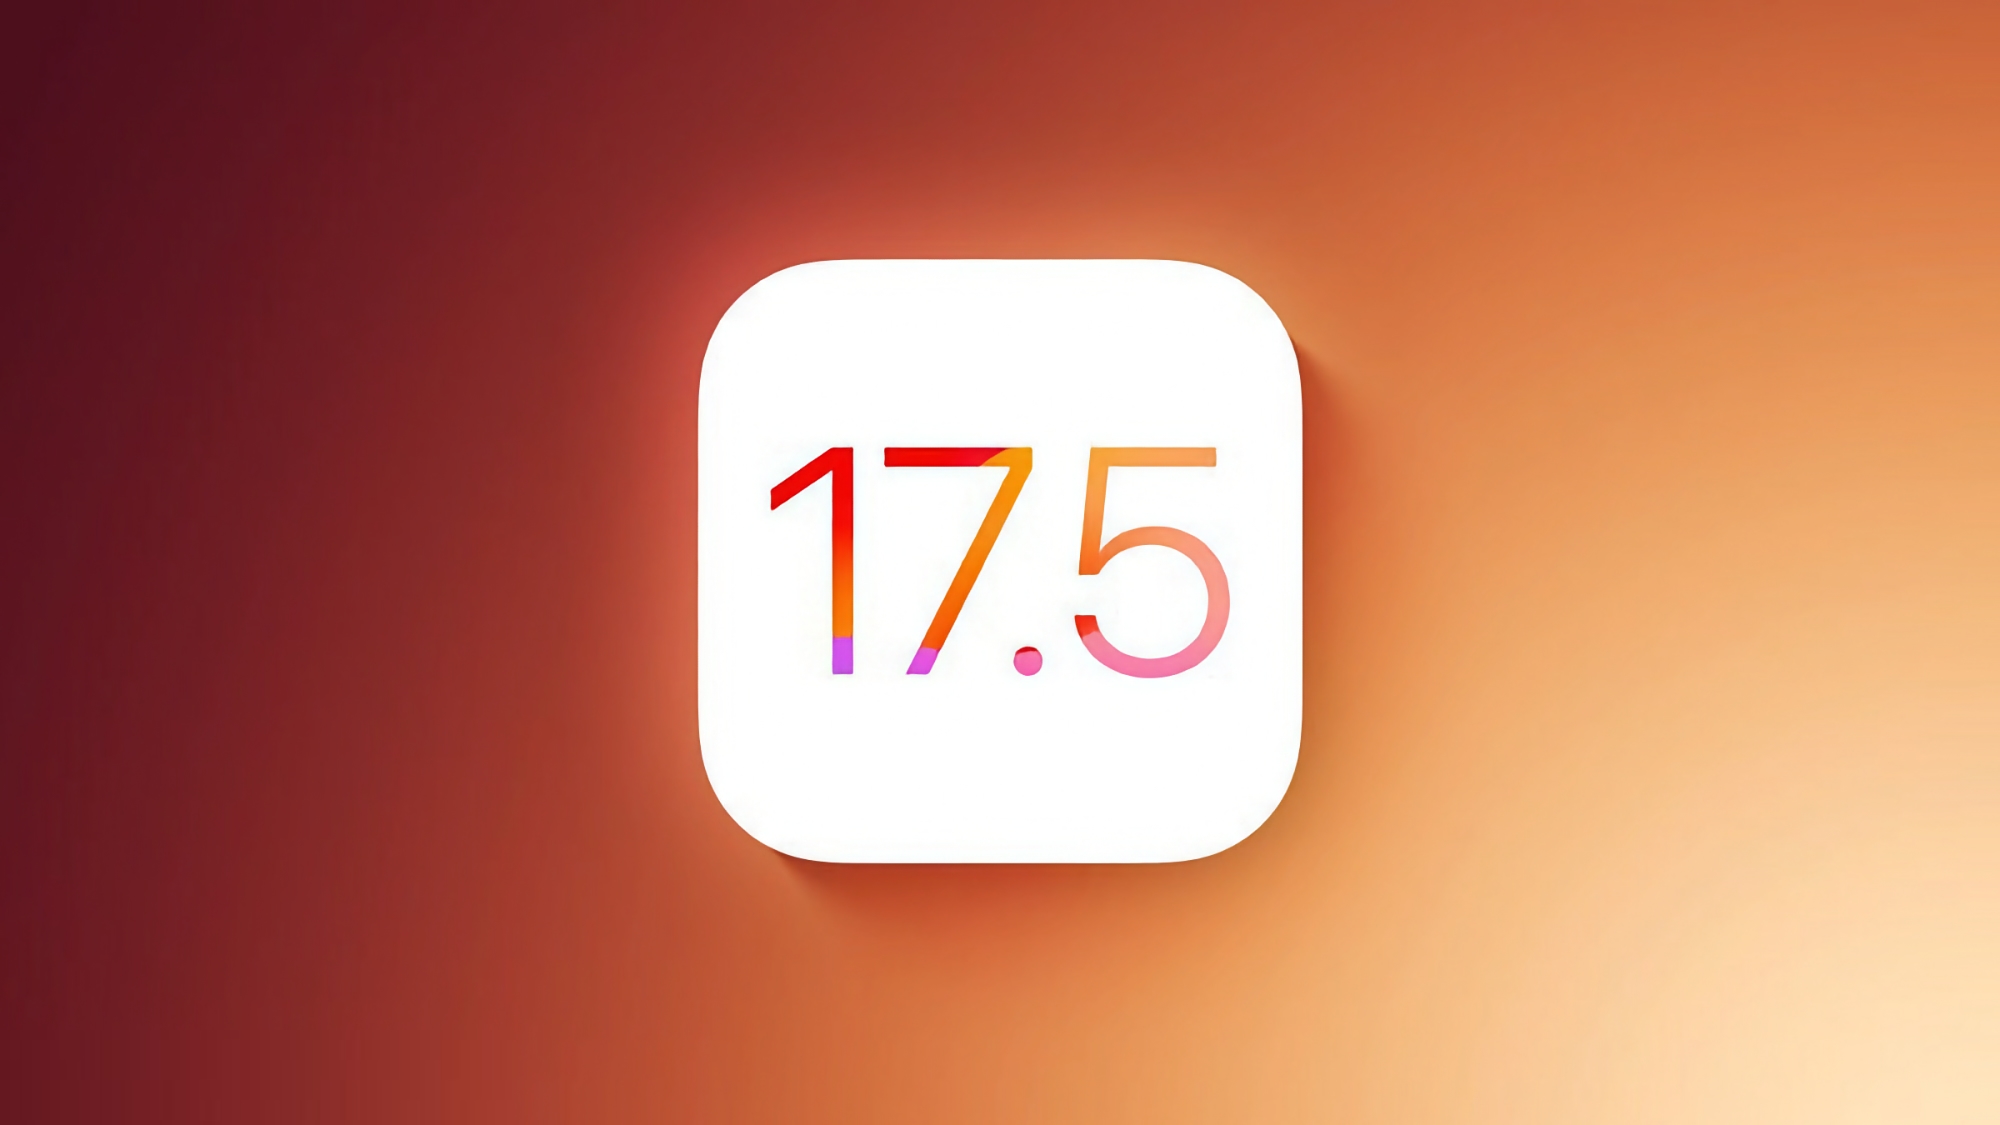 Apple has released iOS 17.5 and iPadOS 17.5 Release Candidates to developers